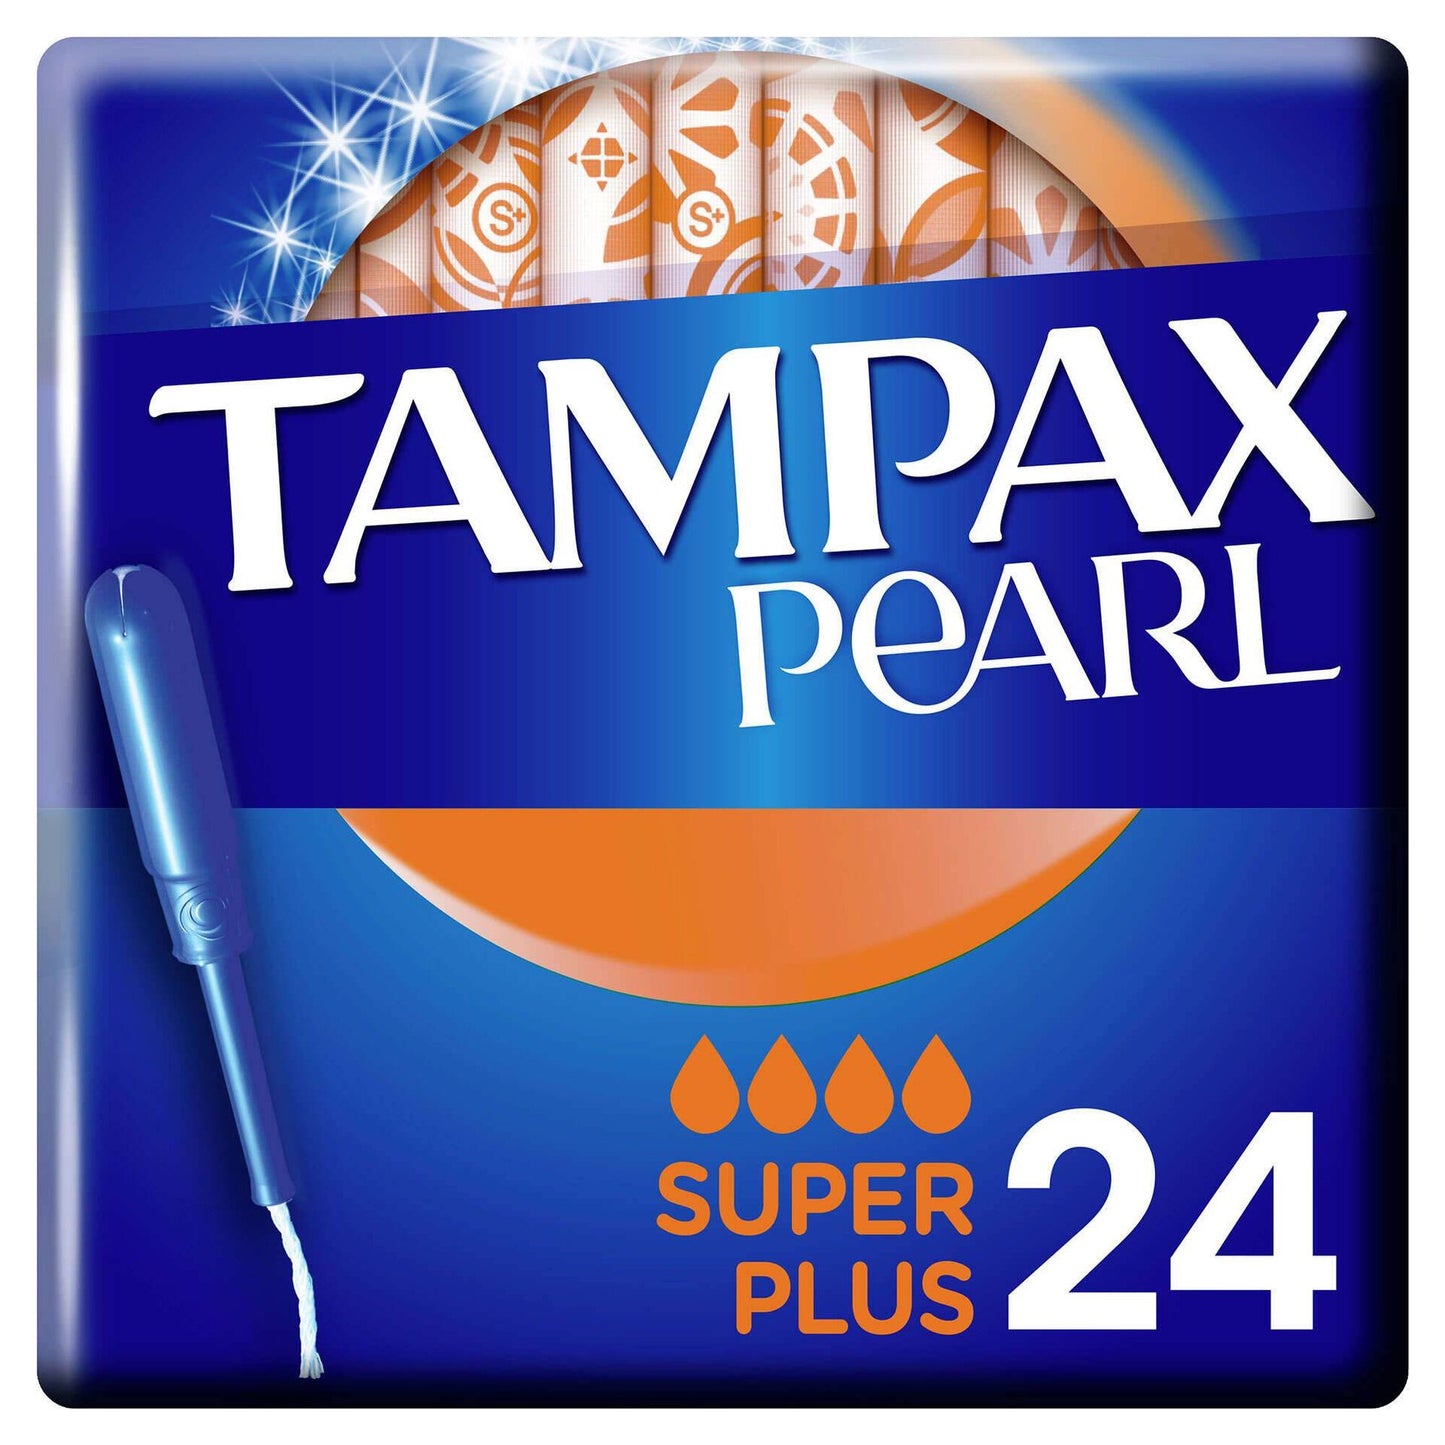 Tampax Pearl Super Plus with Applicator 24 units